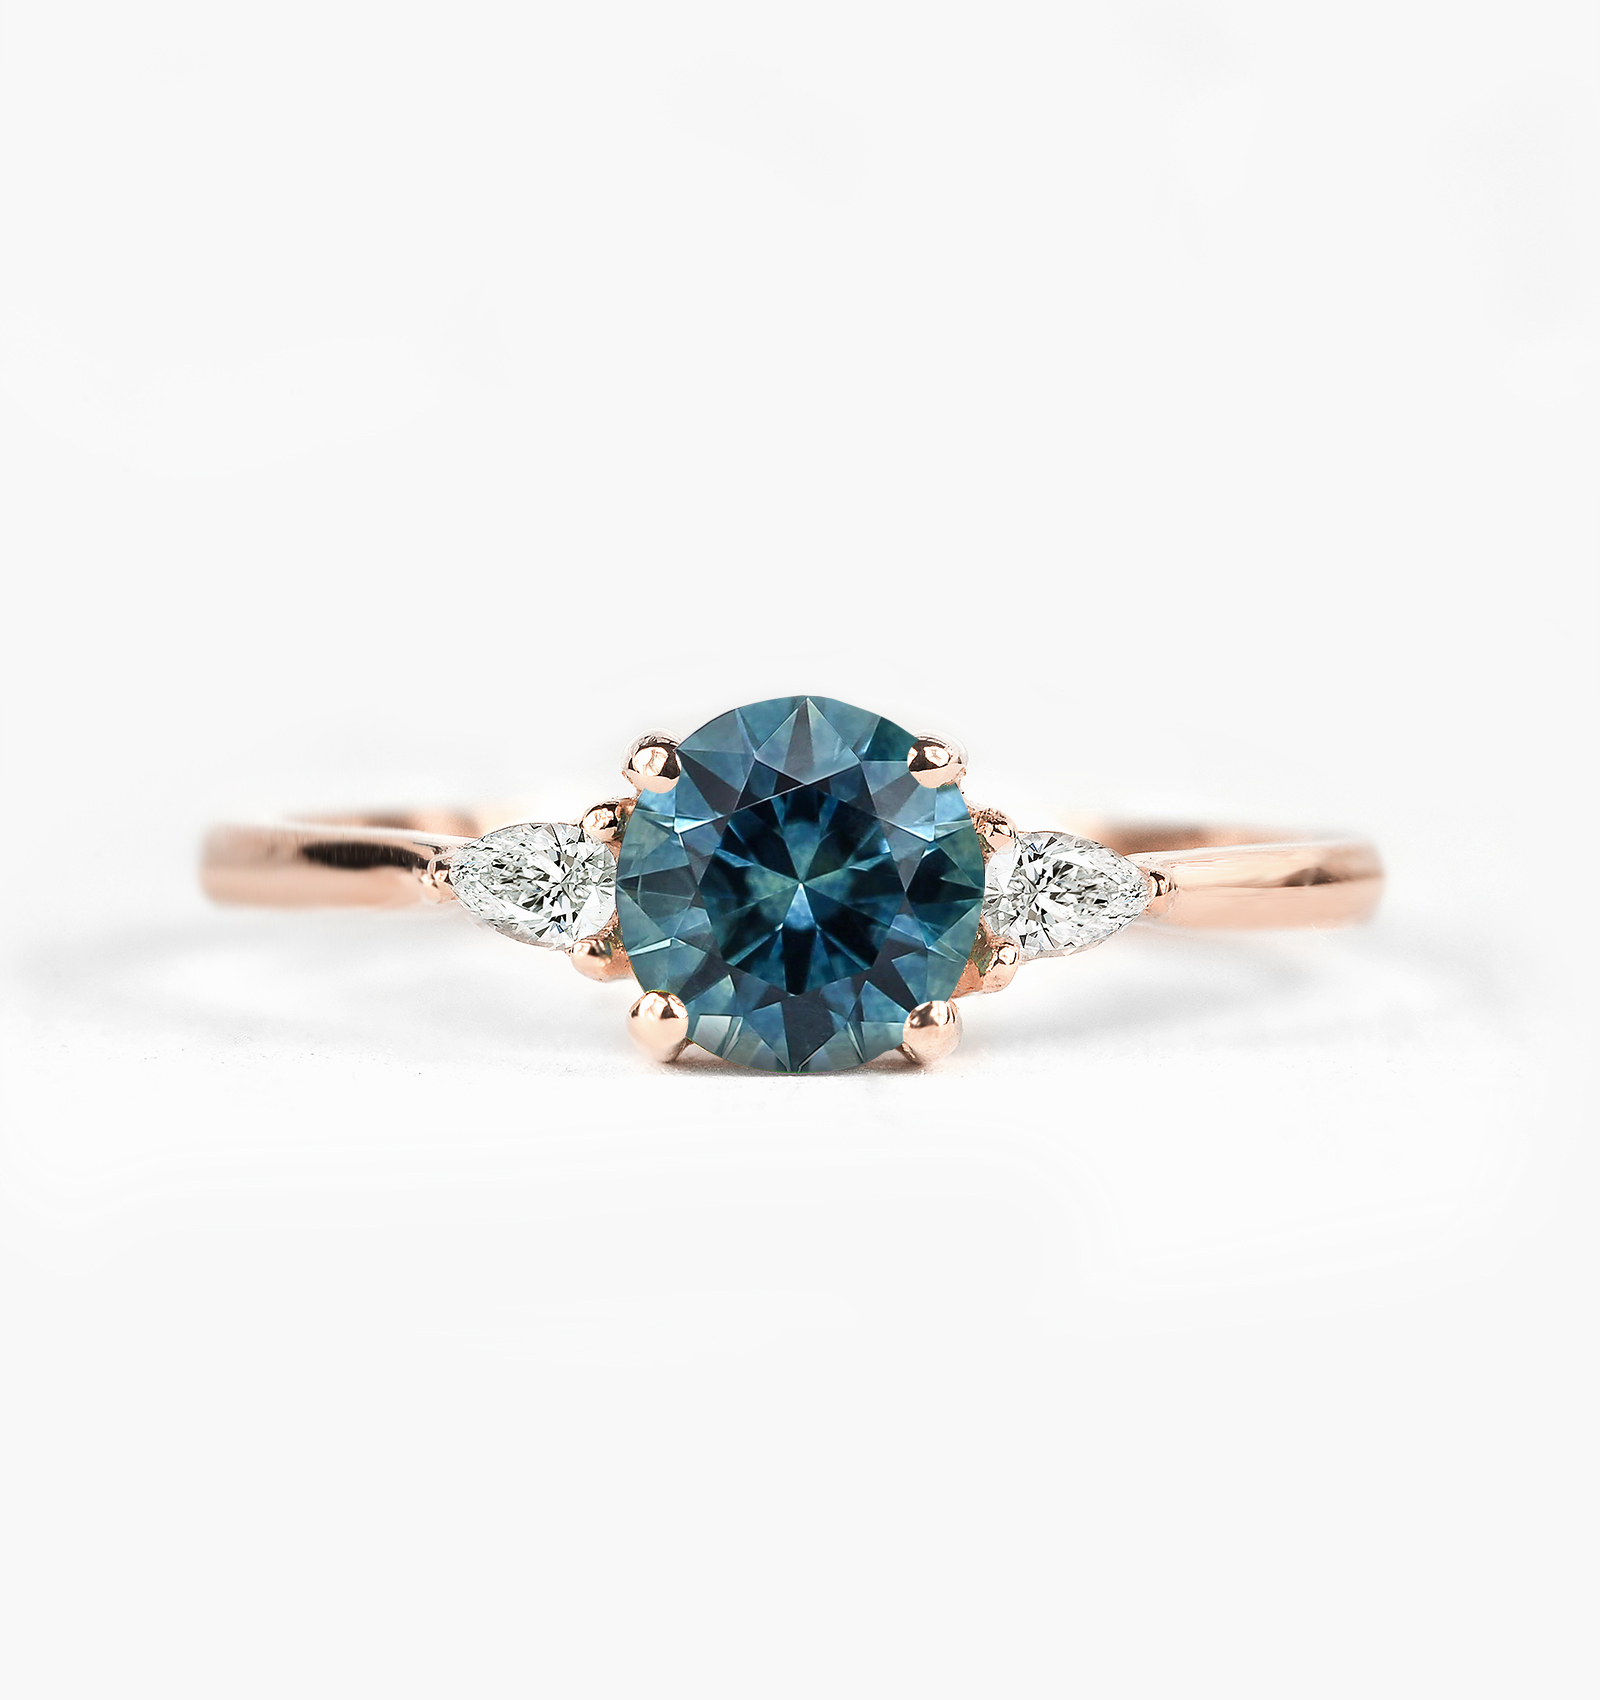 Teal Sapphire engagement ring in three stones ring setting blue green sapphire